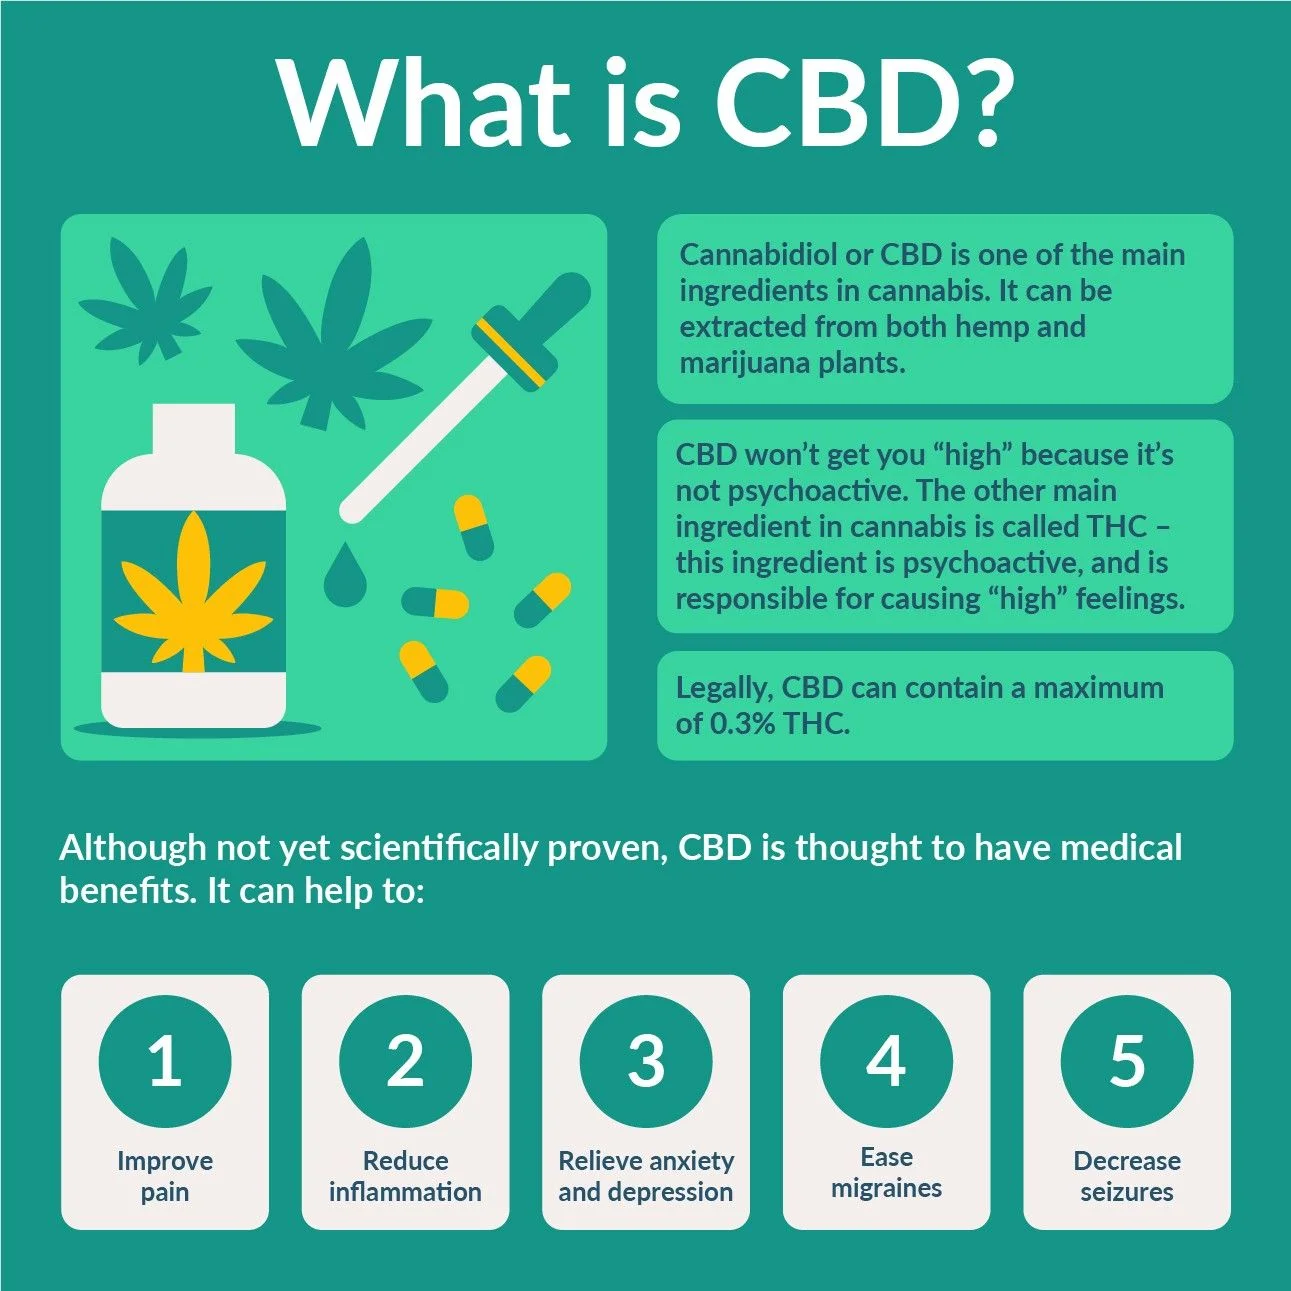 An infographic explaining what CBD is